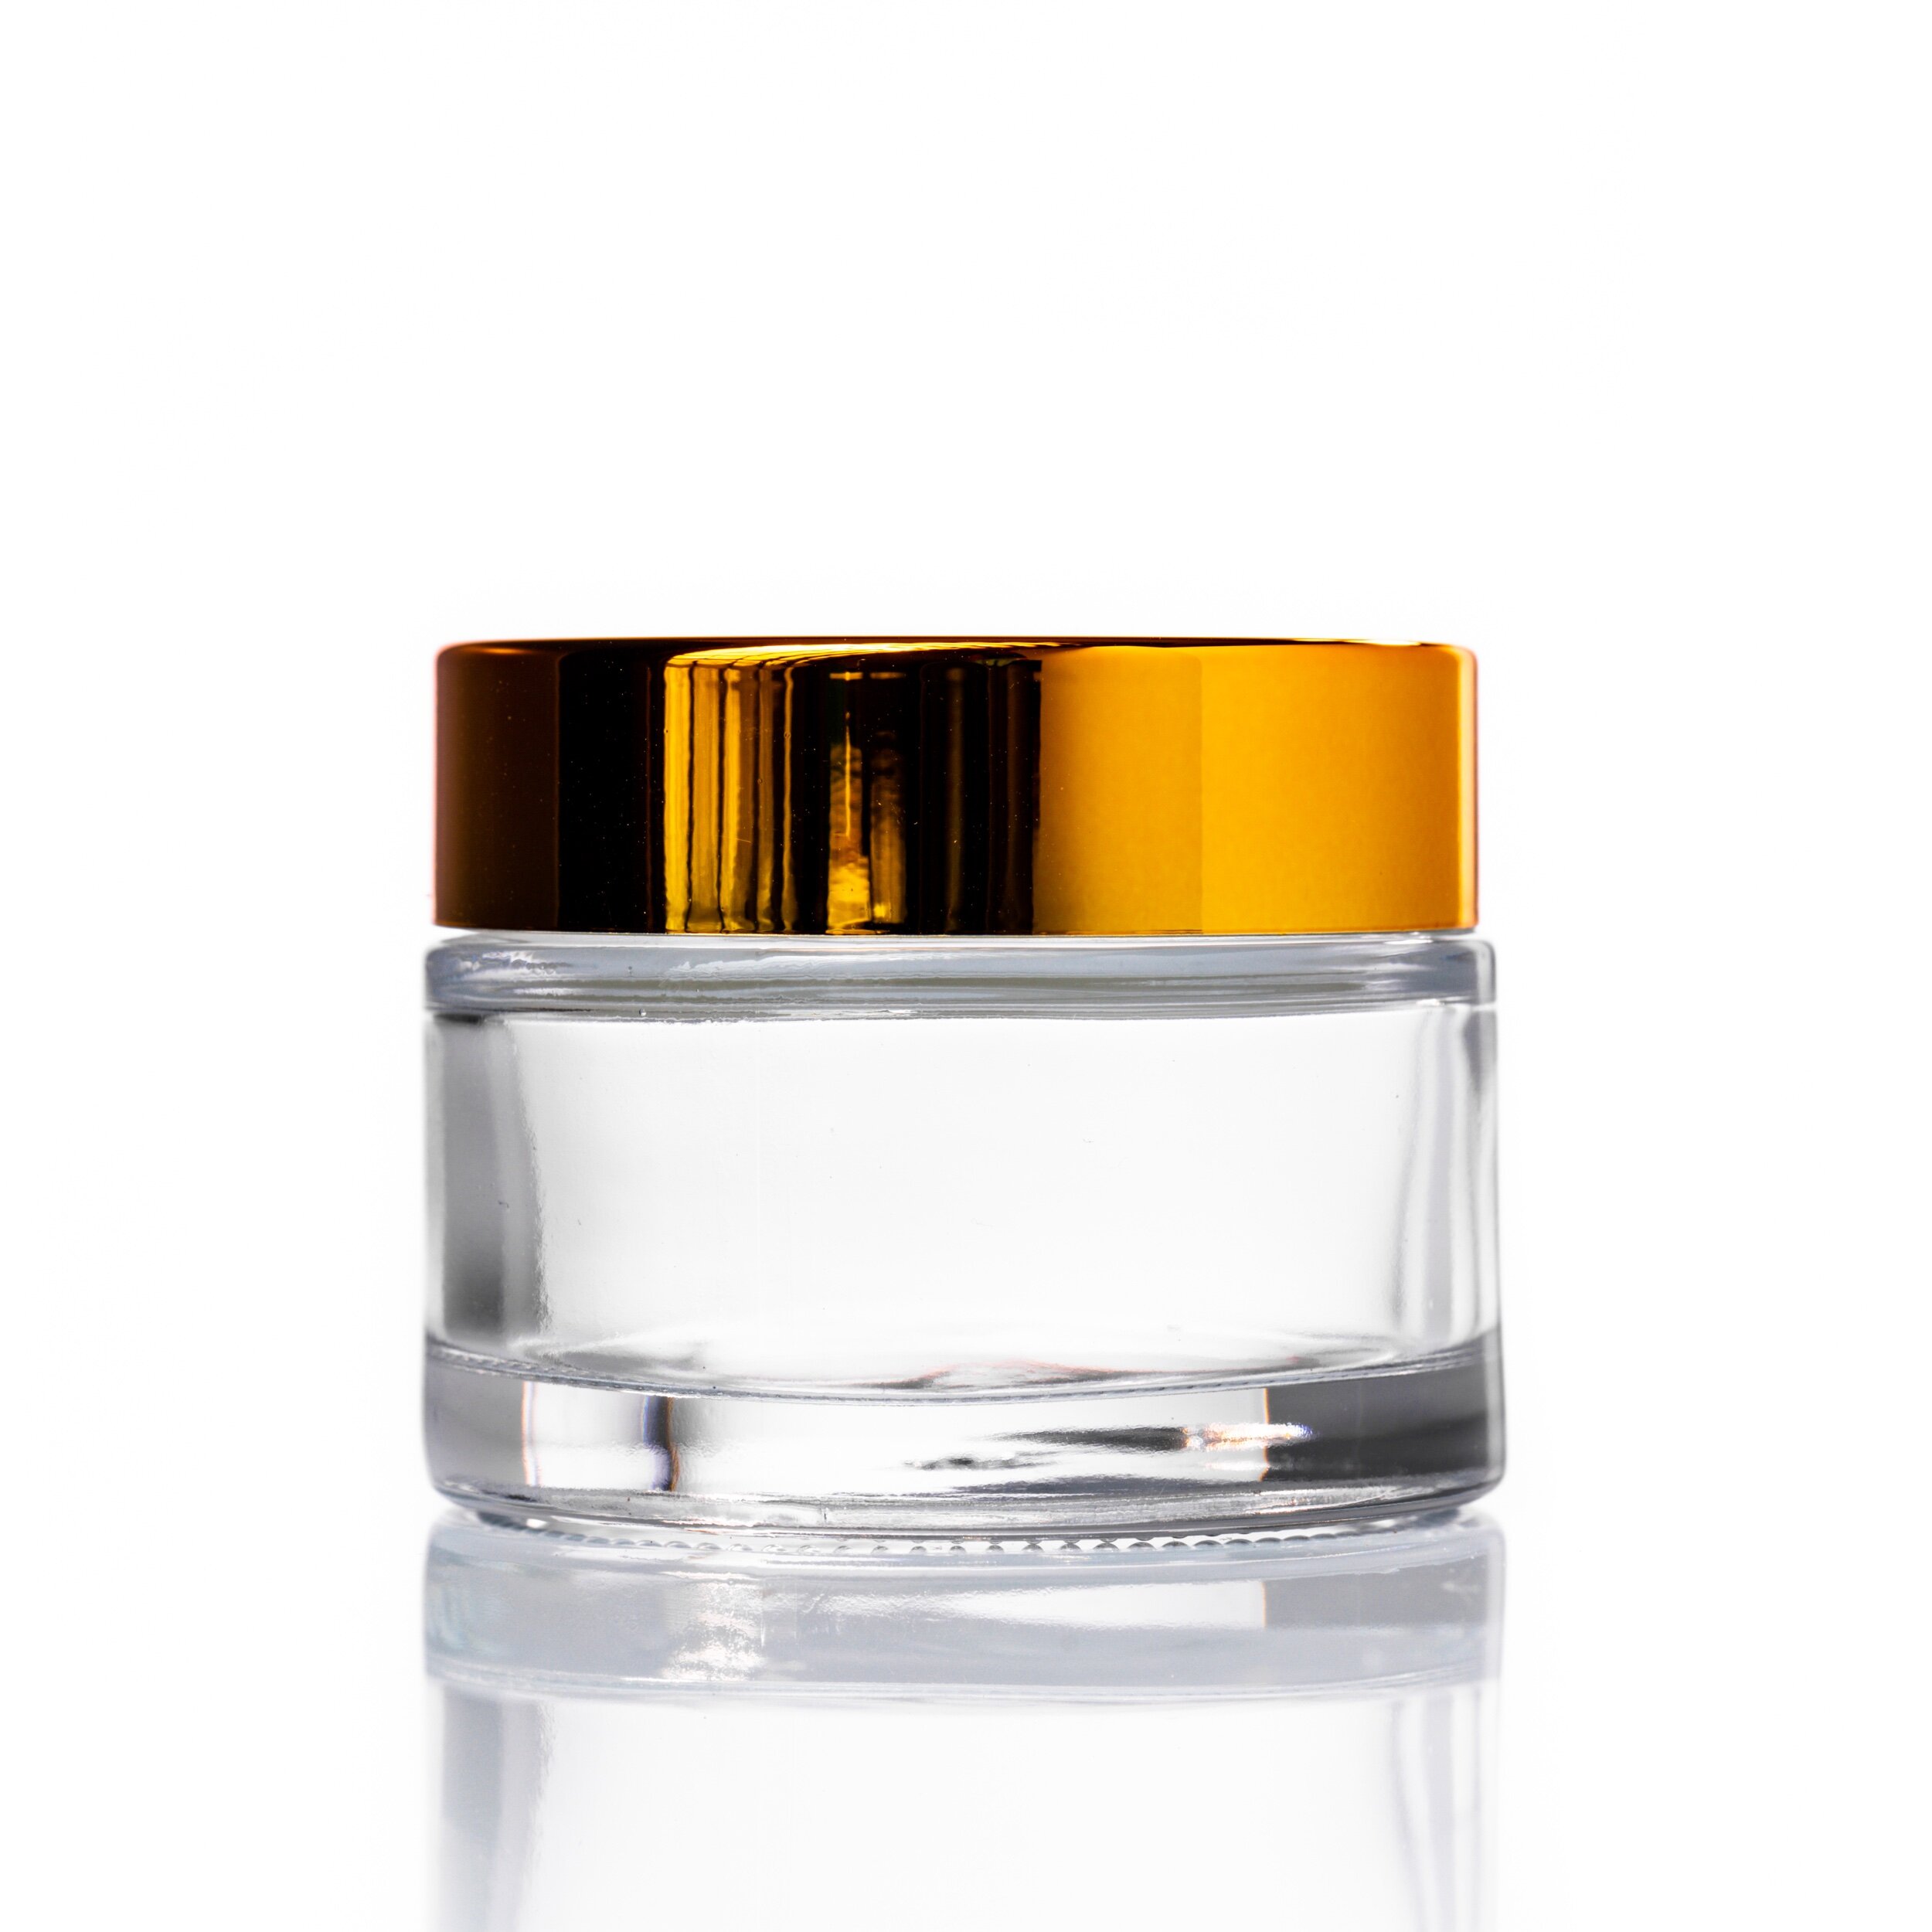 50g clear glass jar with gold lid 4480 x 4480.jpeg